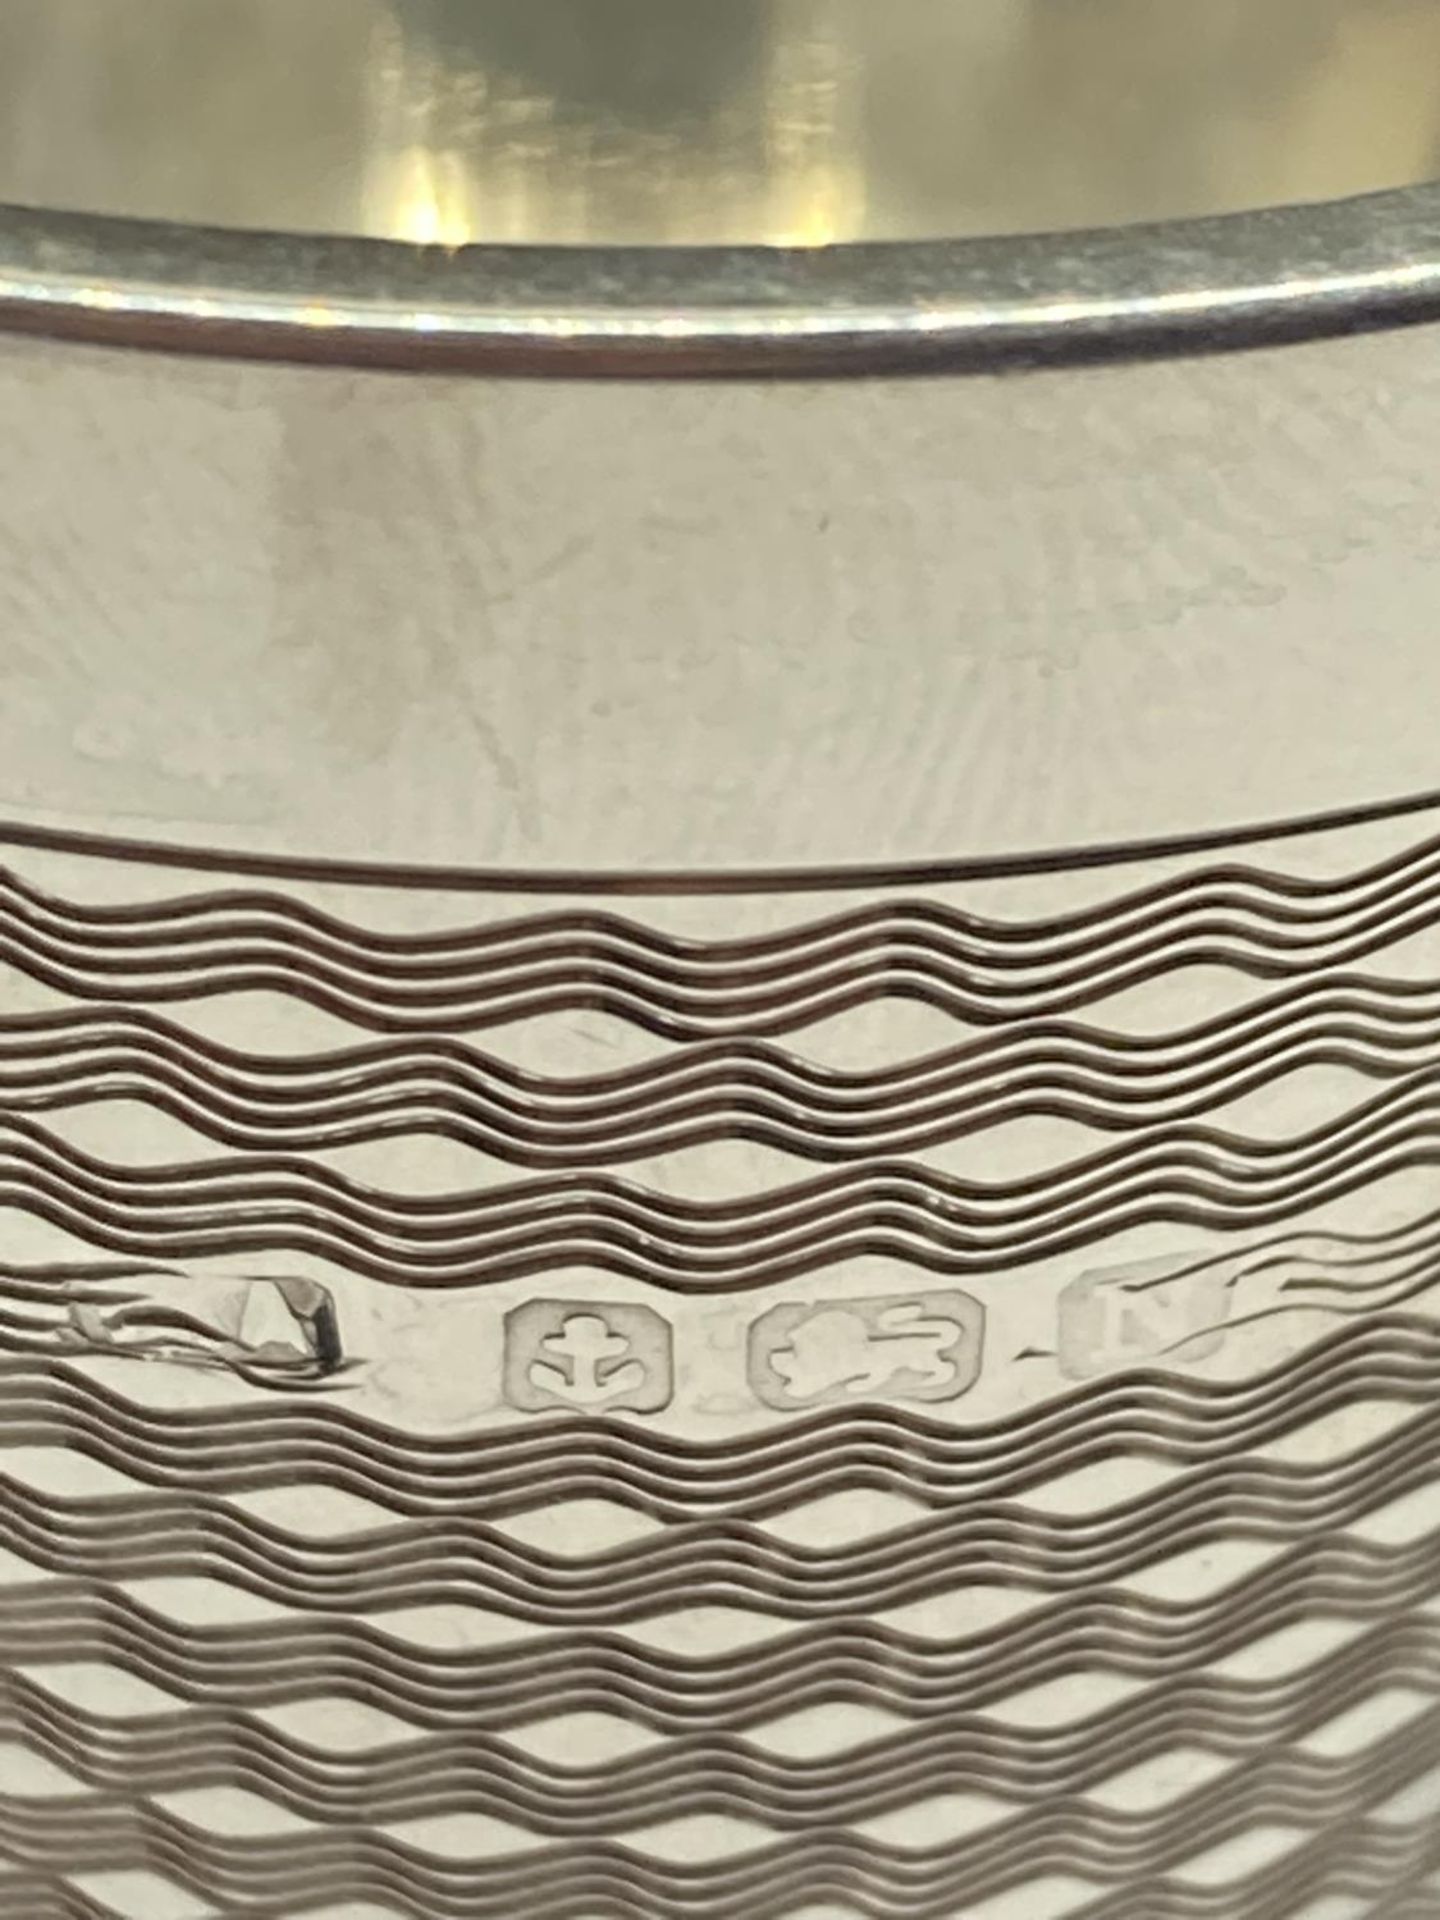 A HALLMARKED BIRMINGHAM SILVER CUP GROSS WEIGHT 75.5 GRAMS (ENGRAVED) - Image 4 of 4